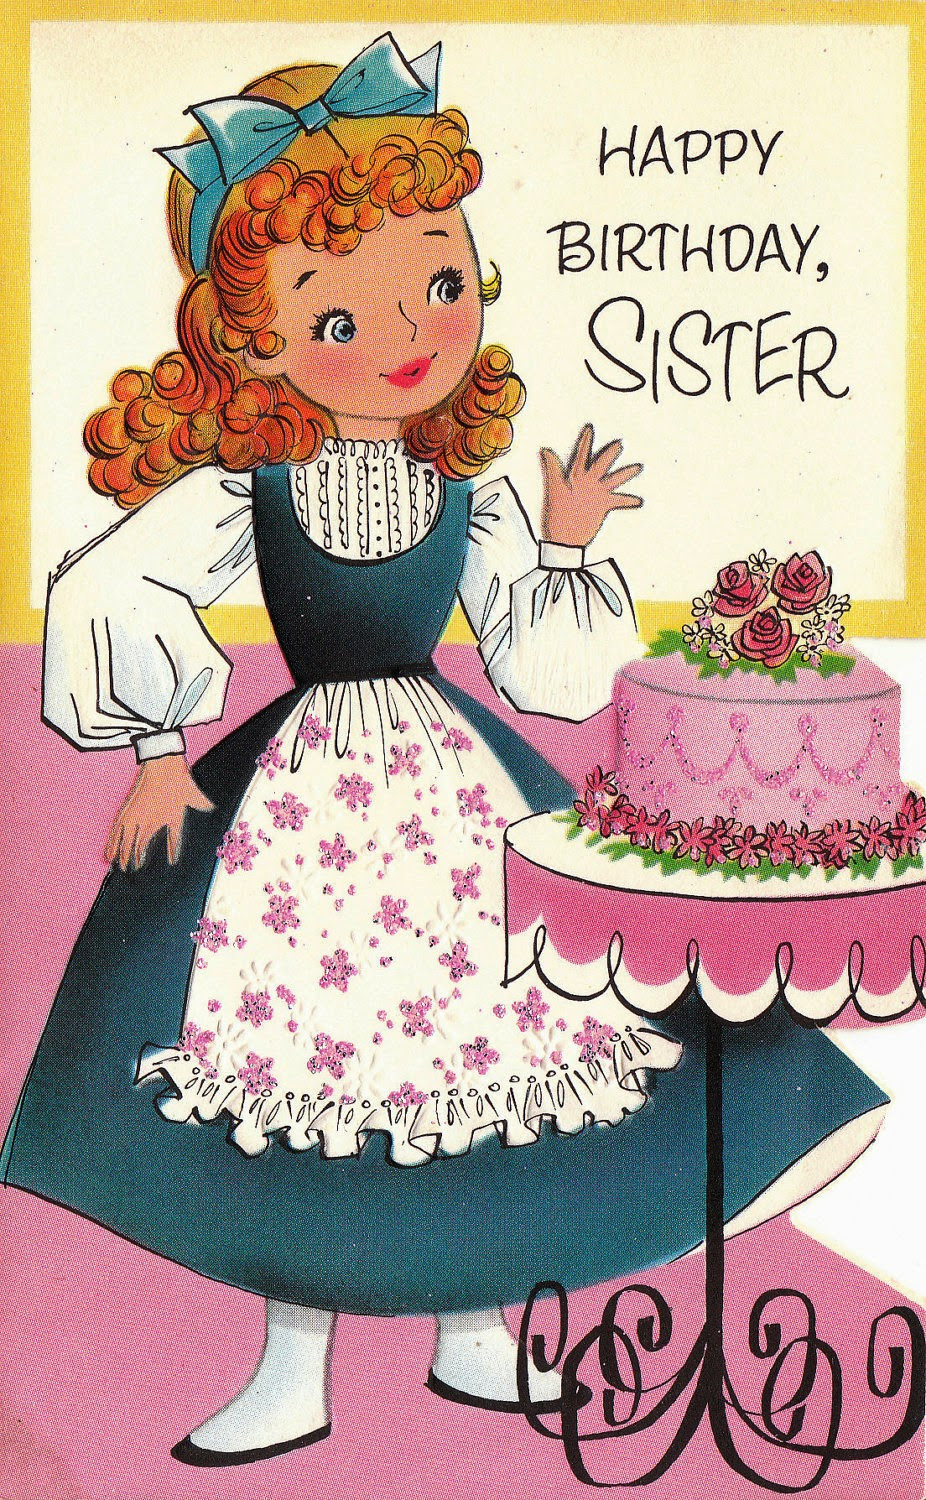 Happy Birthday Wishes To My Sister
 Happy birthday wishes cards images for sister Greetings